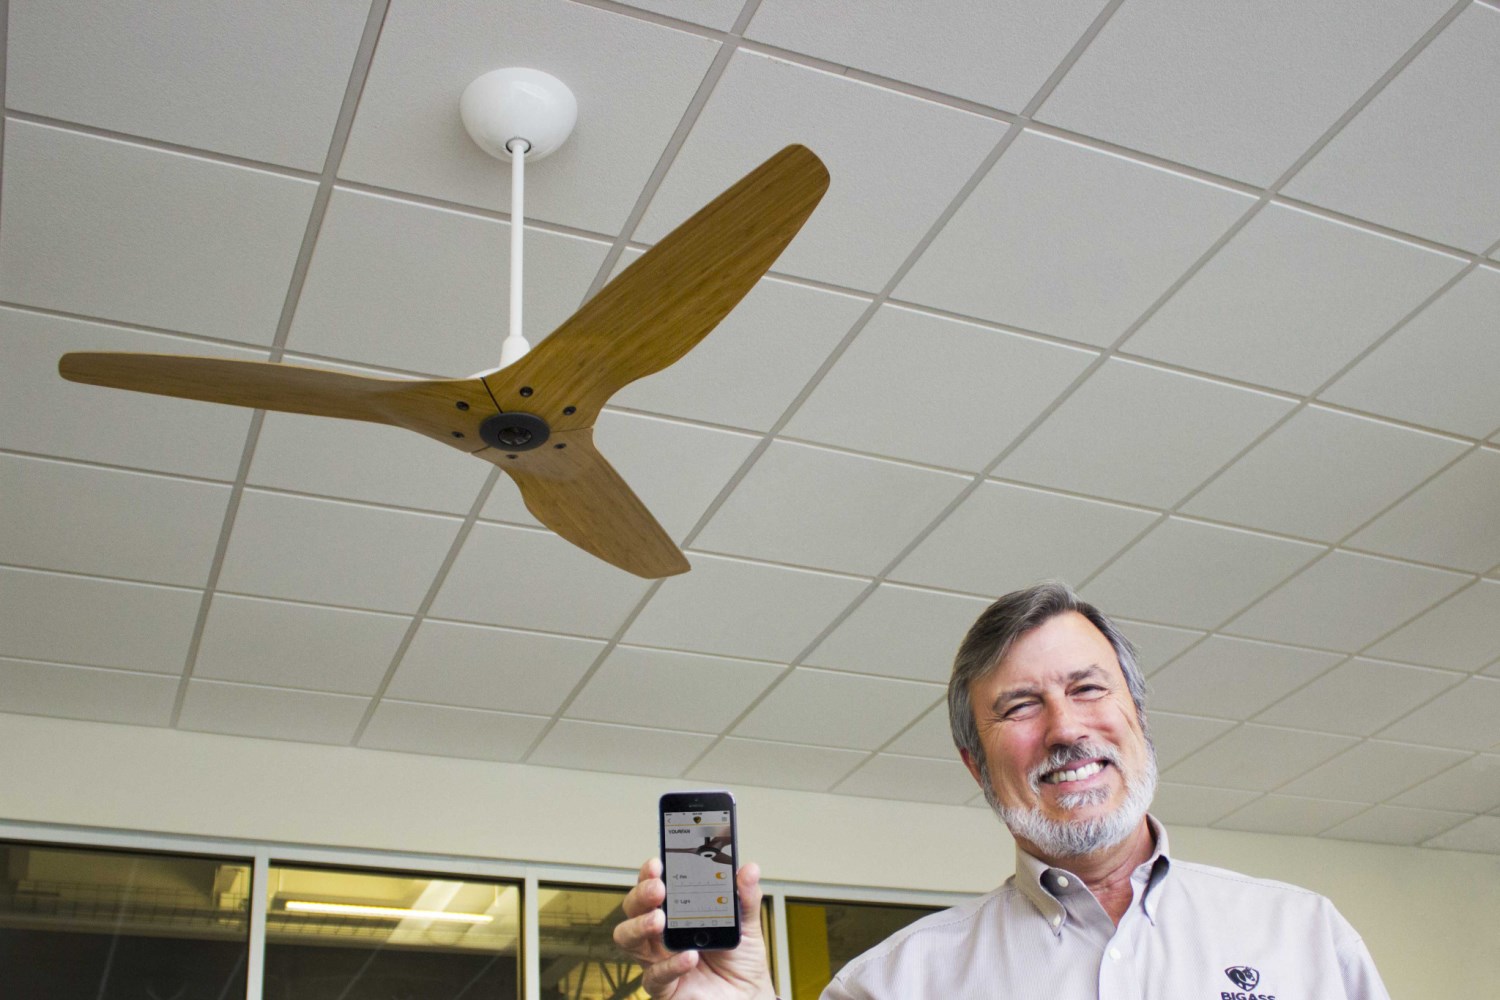 The Haiku fan is the world’s first smart ceiling fan, designed with an on-board computer and array of sensors (Big Ass Fans)